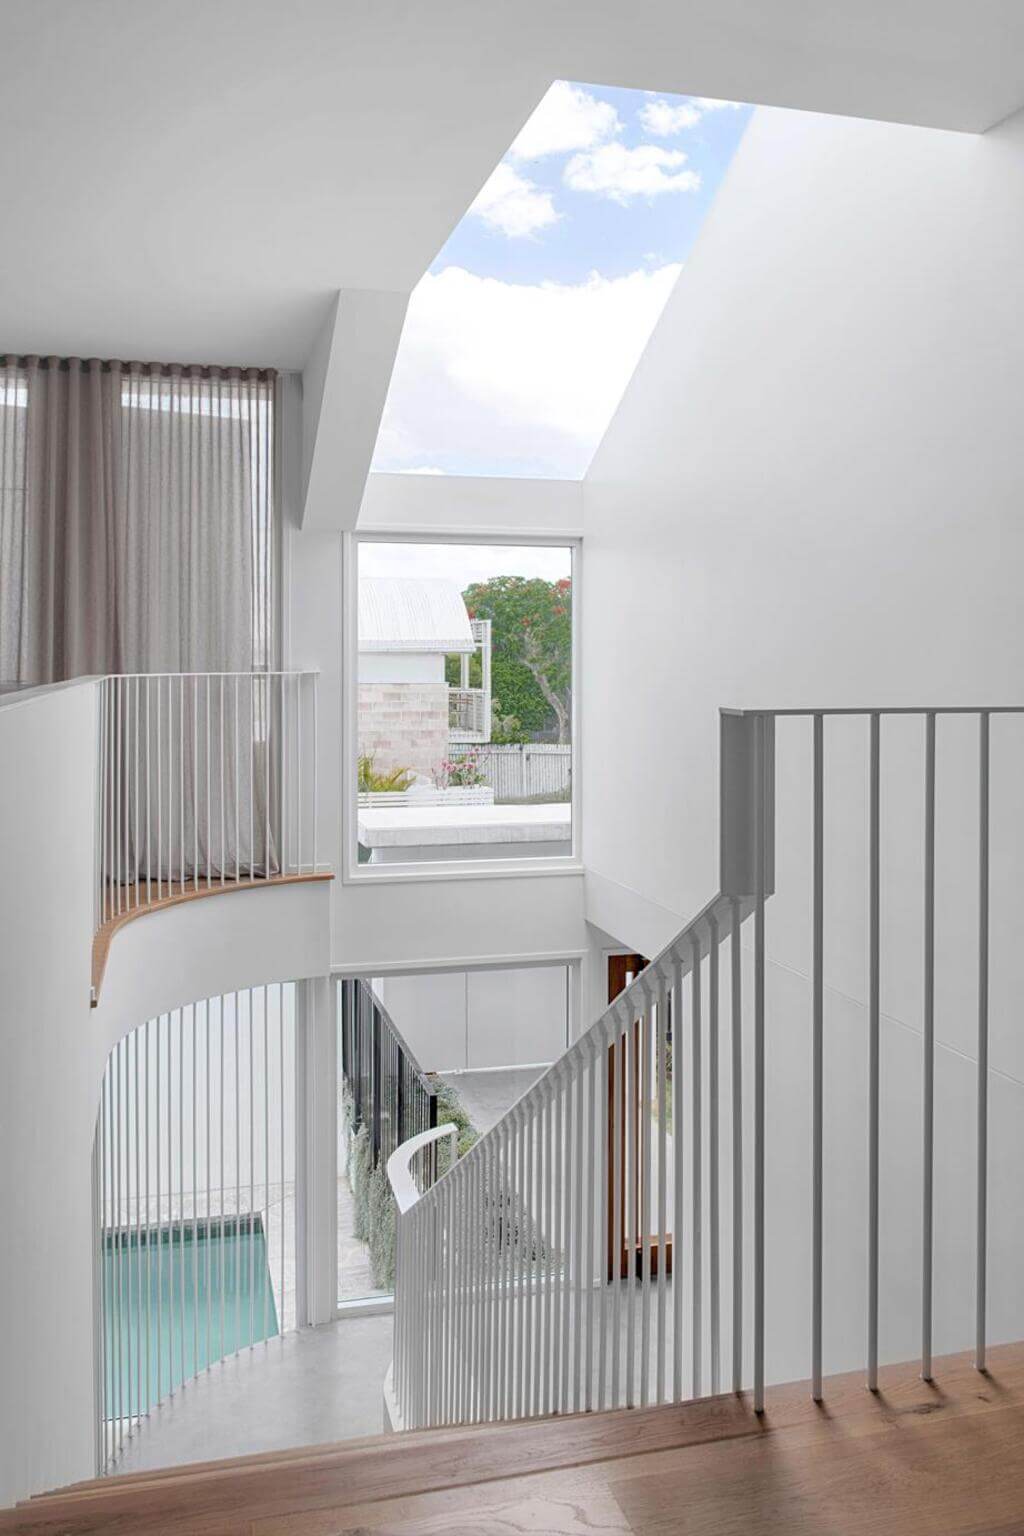 A Brisbane Queenslander Home staircase leading to a second floor with a skylight